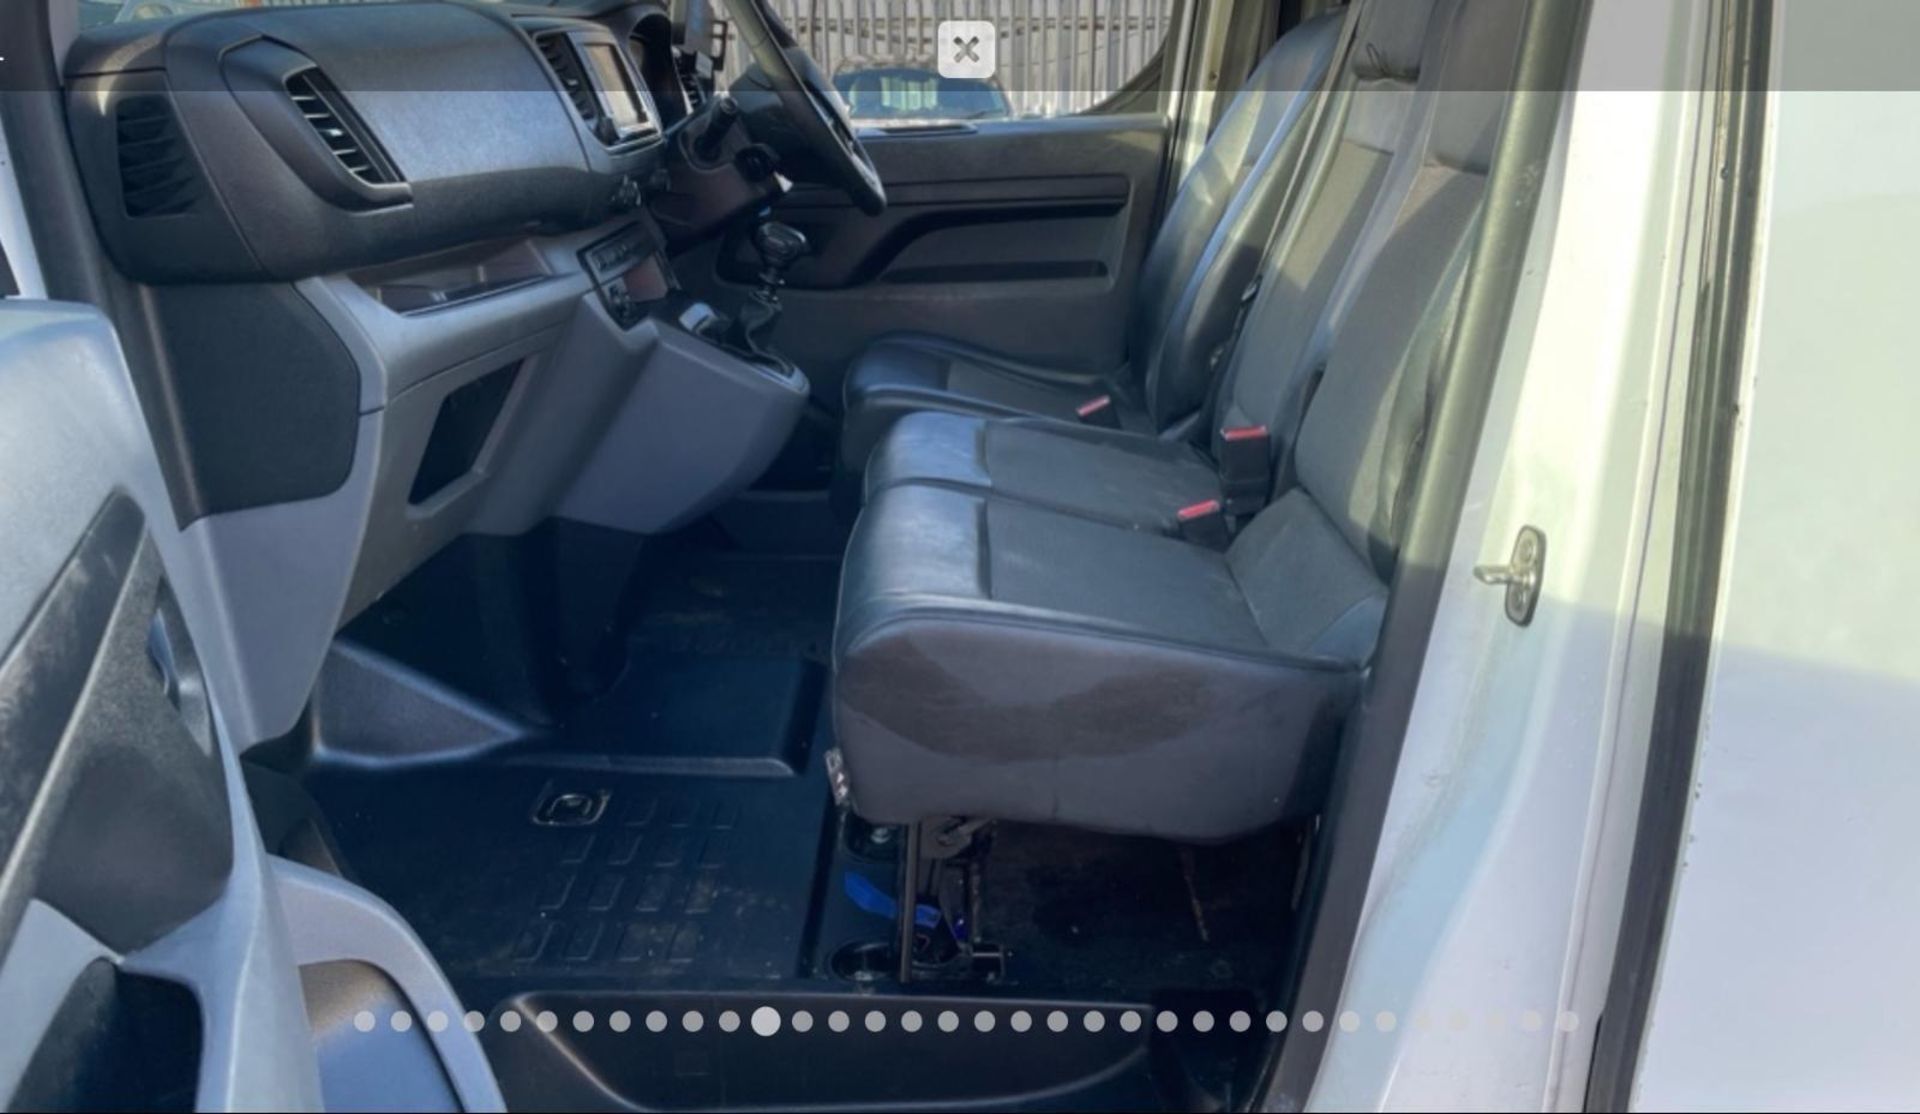 2019-19 REG CITROEN DISPATCH XS 1000 L1H1 - HPI CLEAR - READY TO GO! - Image 7 of 12